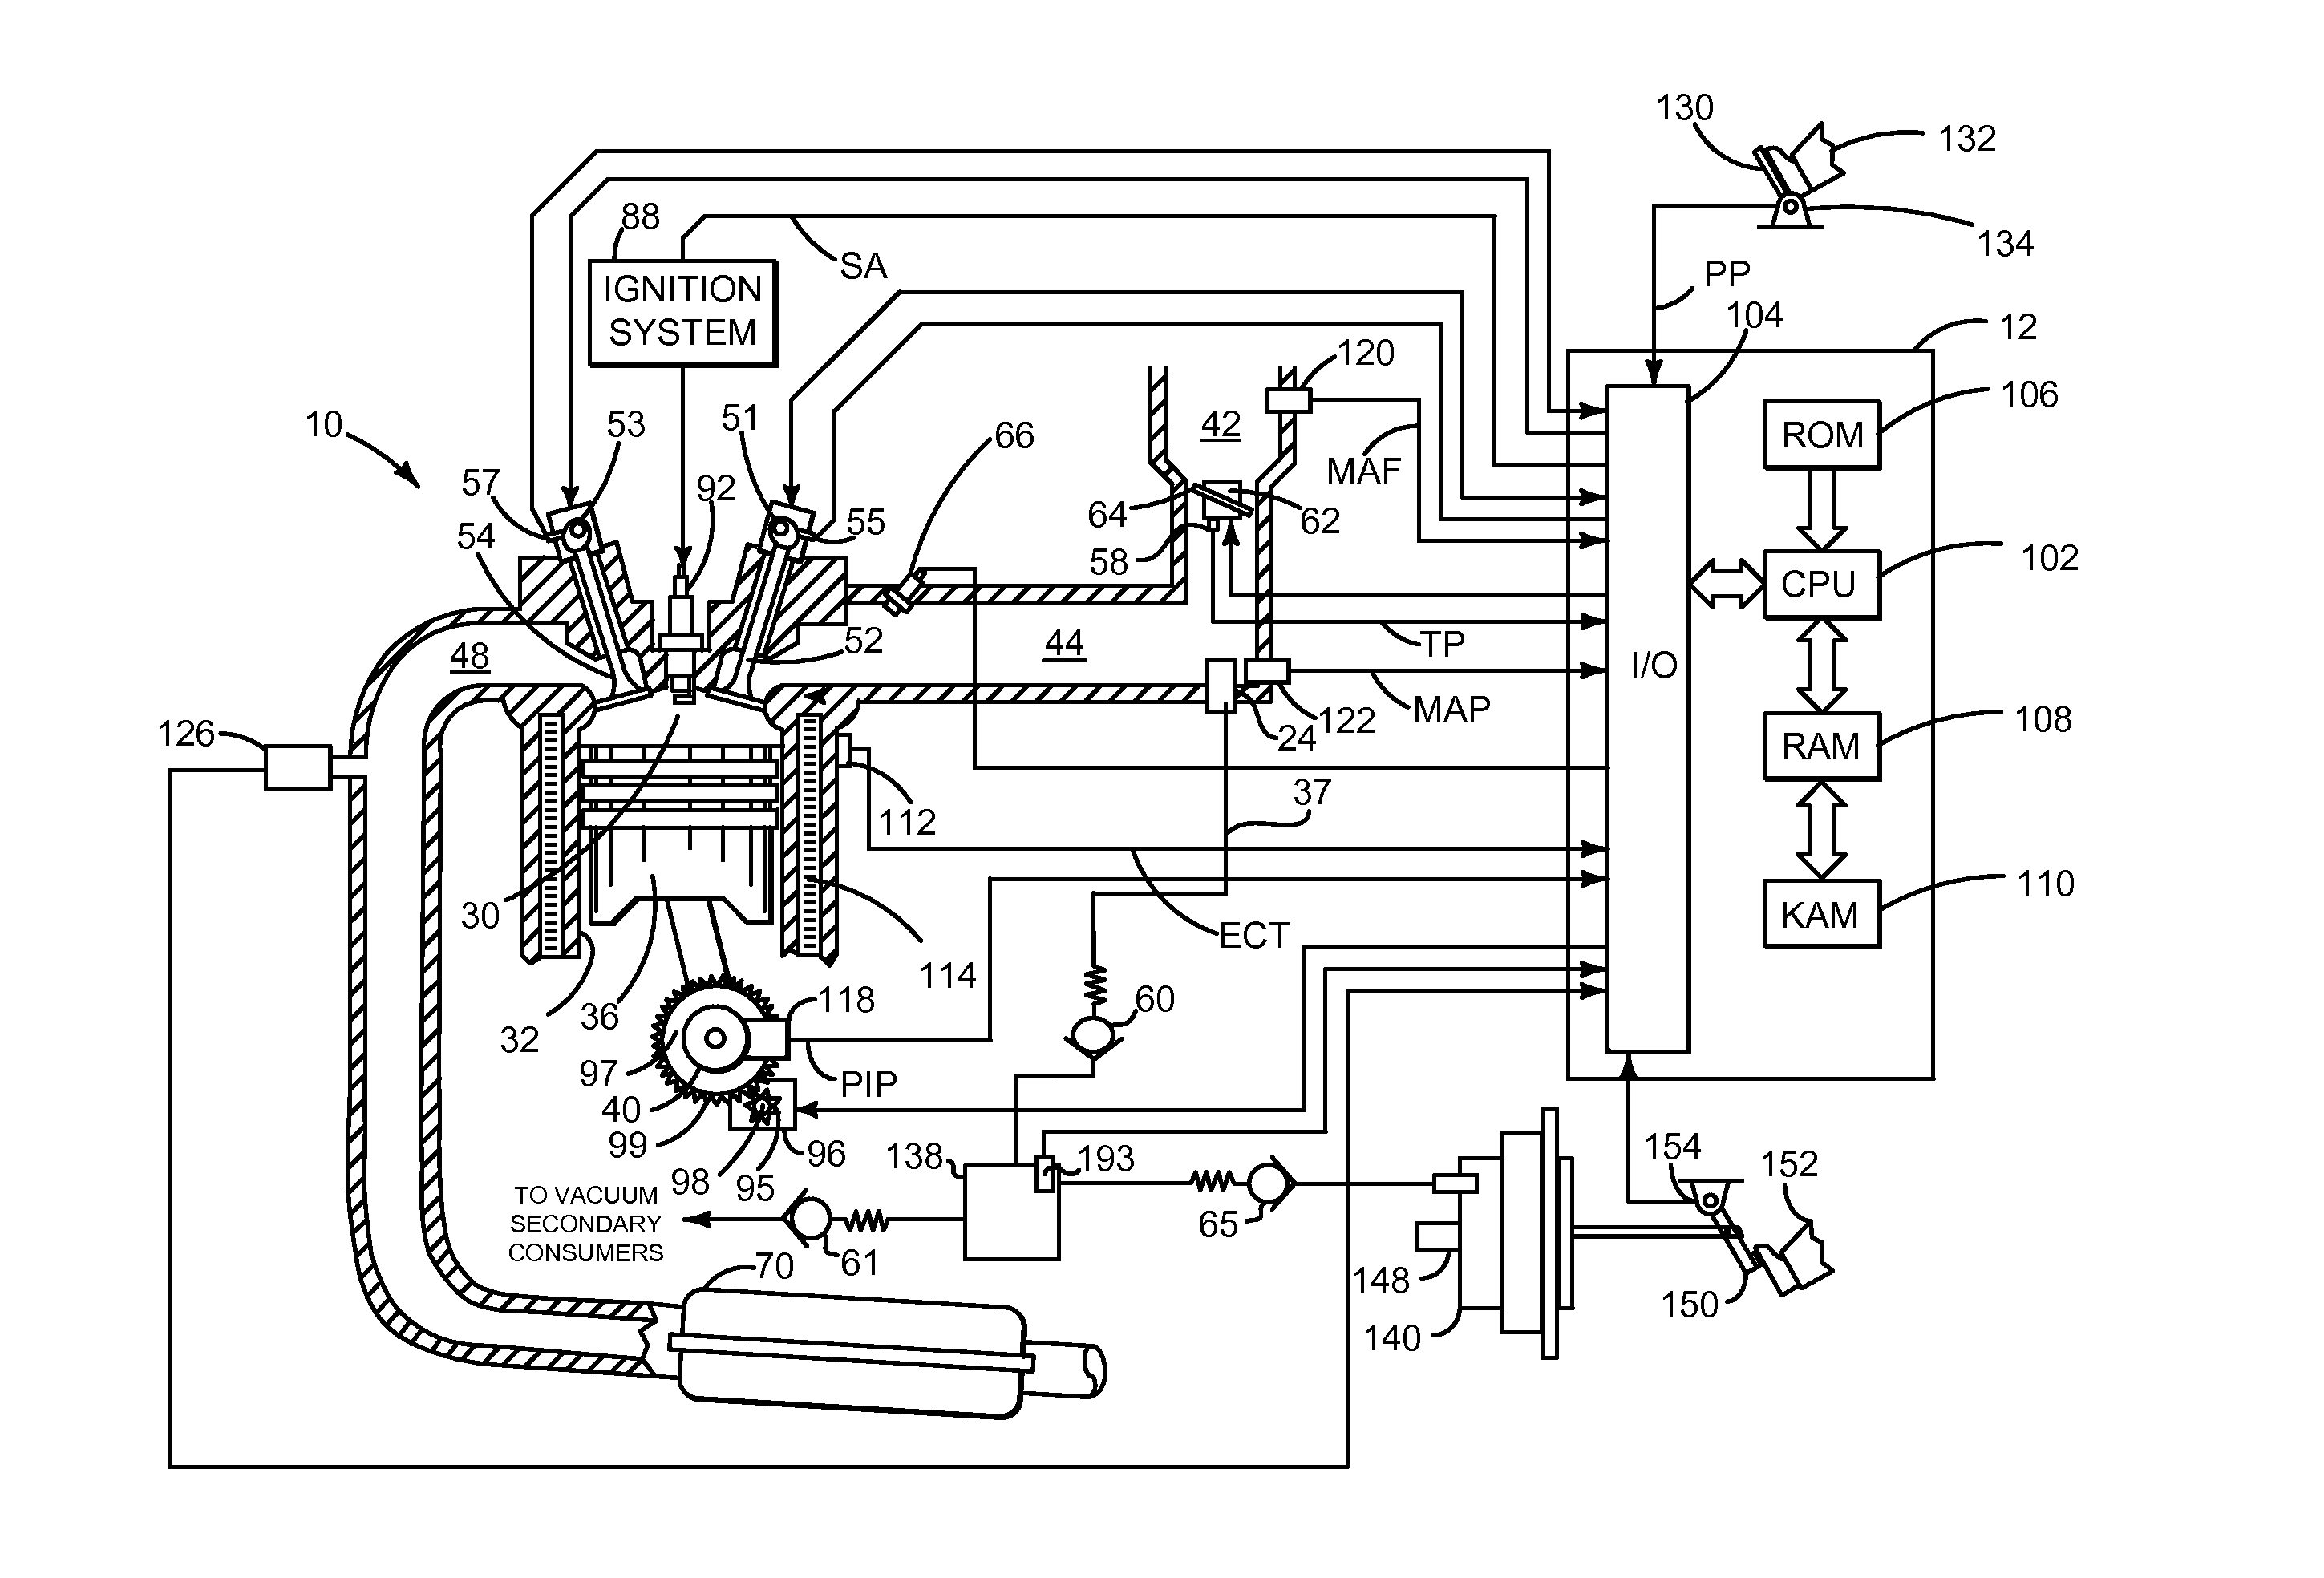 Method and system for providing vacuum for a vehicle